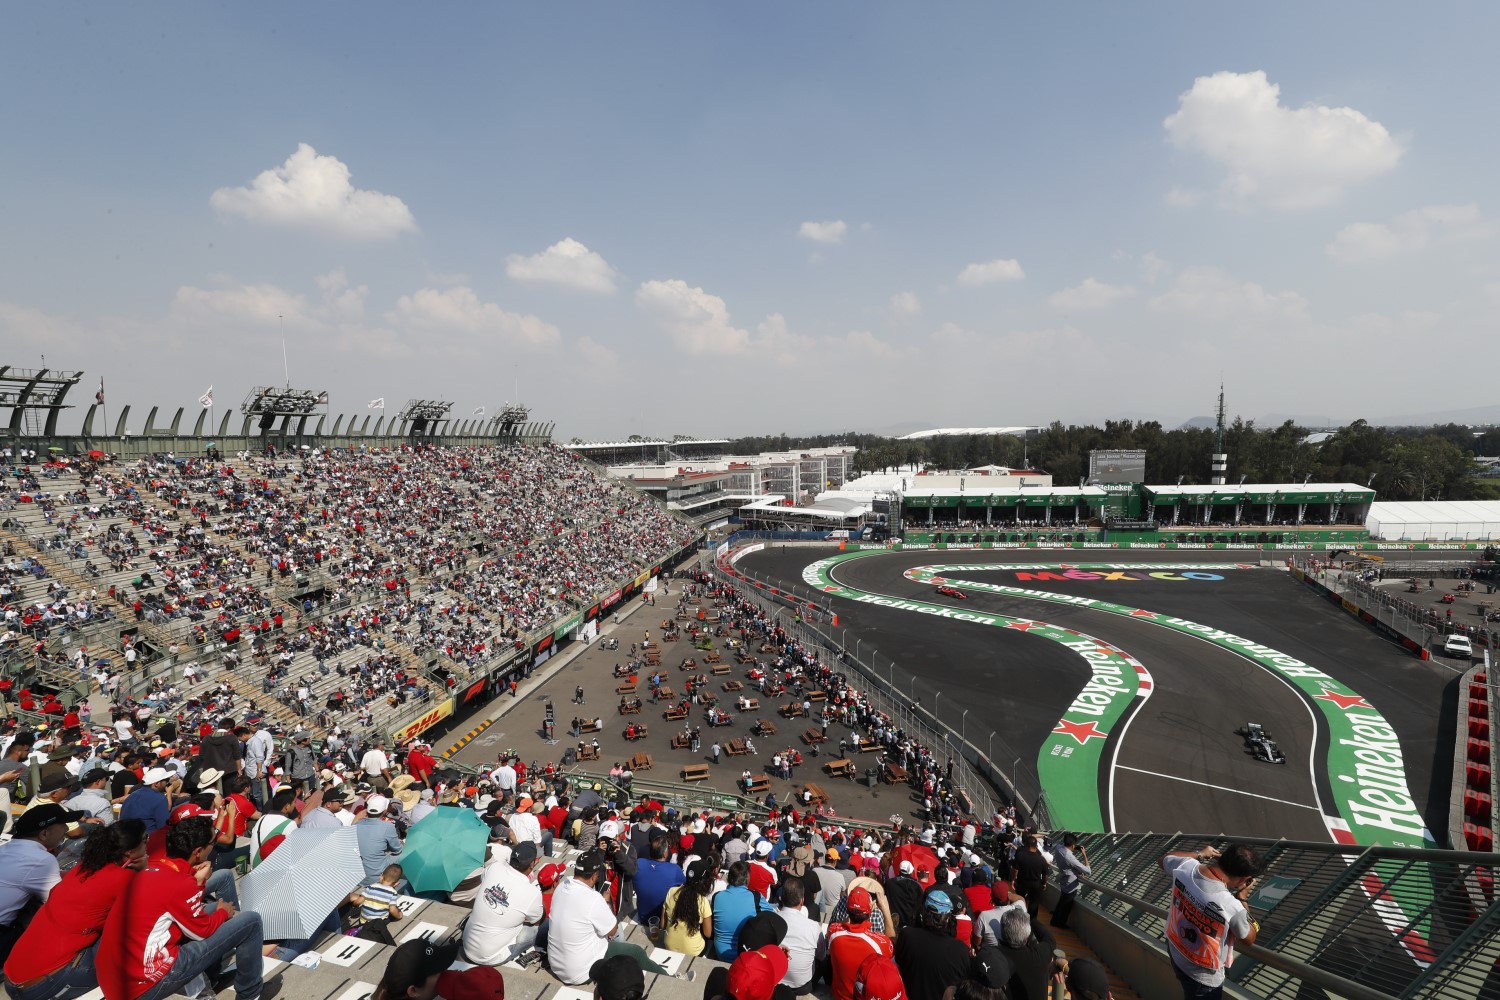 The Mexican GP, despite huge crowds, wouldgo belly-up without state funding. More voo-doo economics